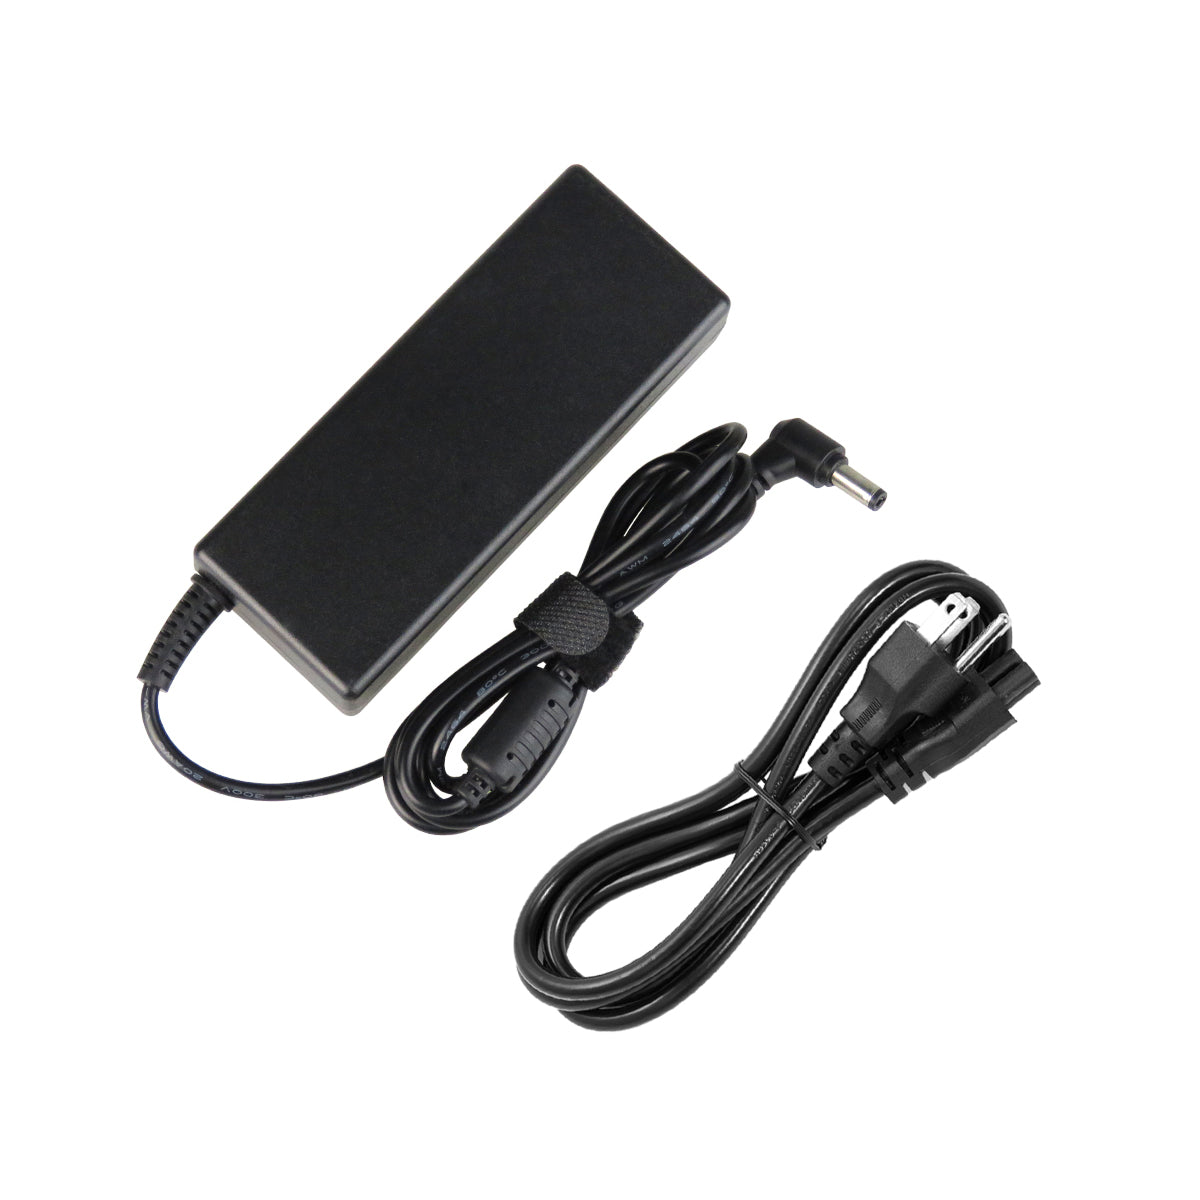 AC Adapter Charger for ASUS N73SM Notebook.